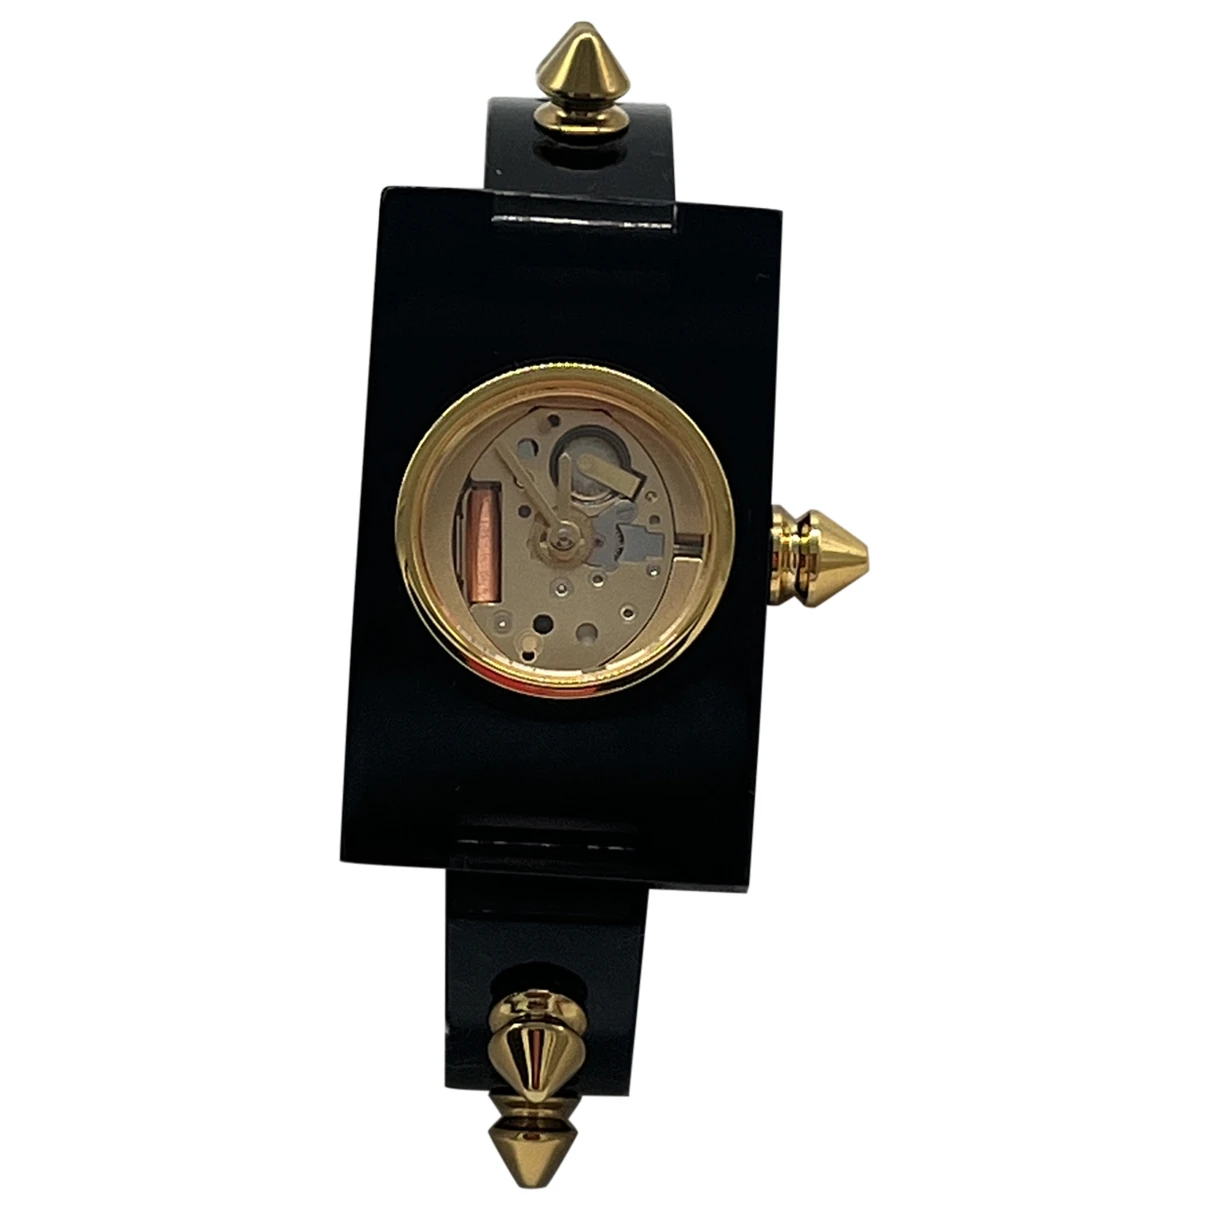 Pre-owned Gucci Watch In Black